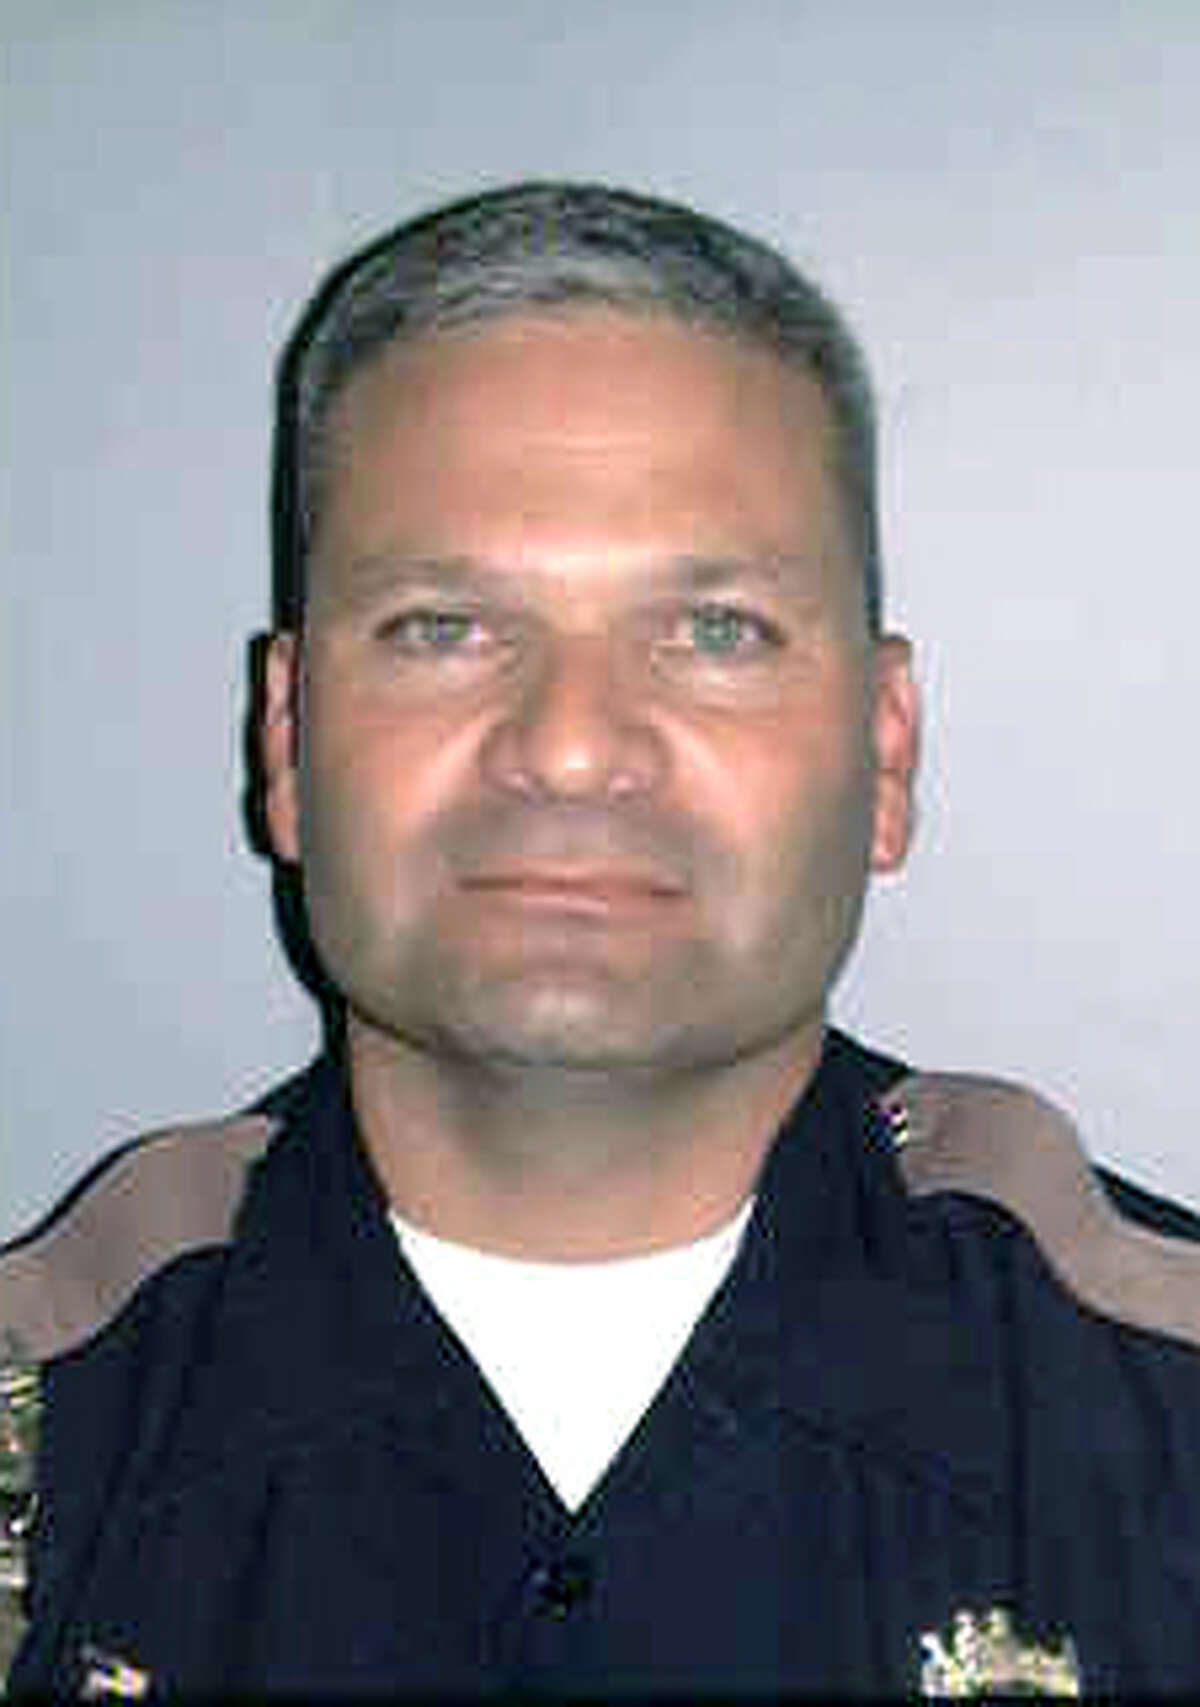 Bexar County Sgt. Kenneth Vann was shot and killed May 28, 2011, at the intersection of Loop 410 and Rigsby Avenue in San Antonio.